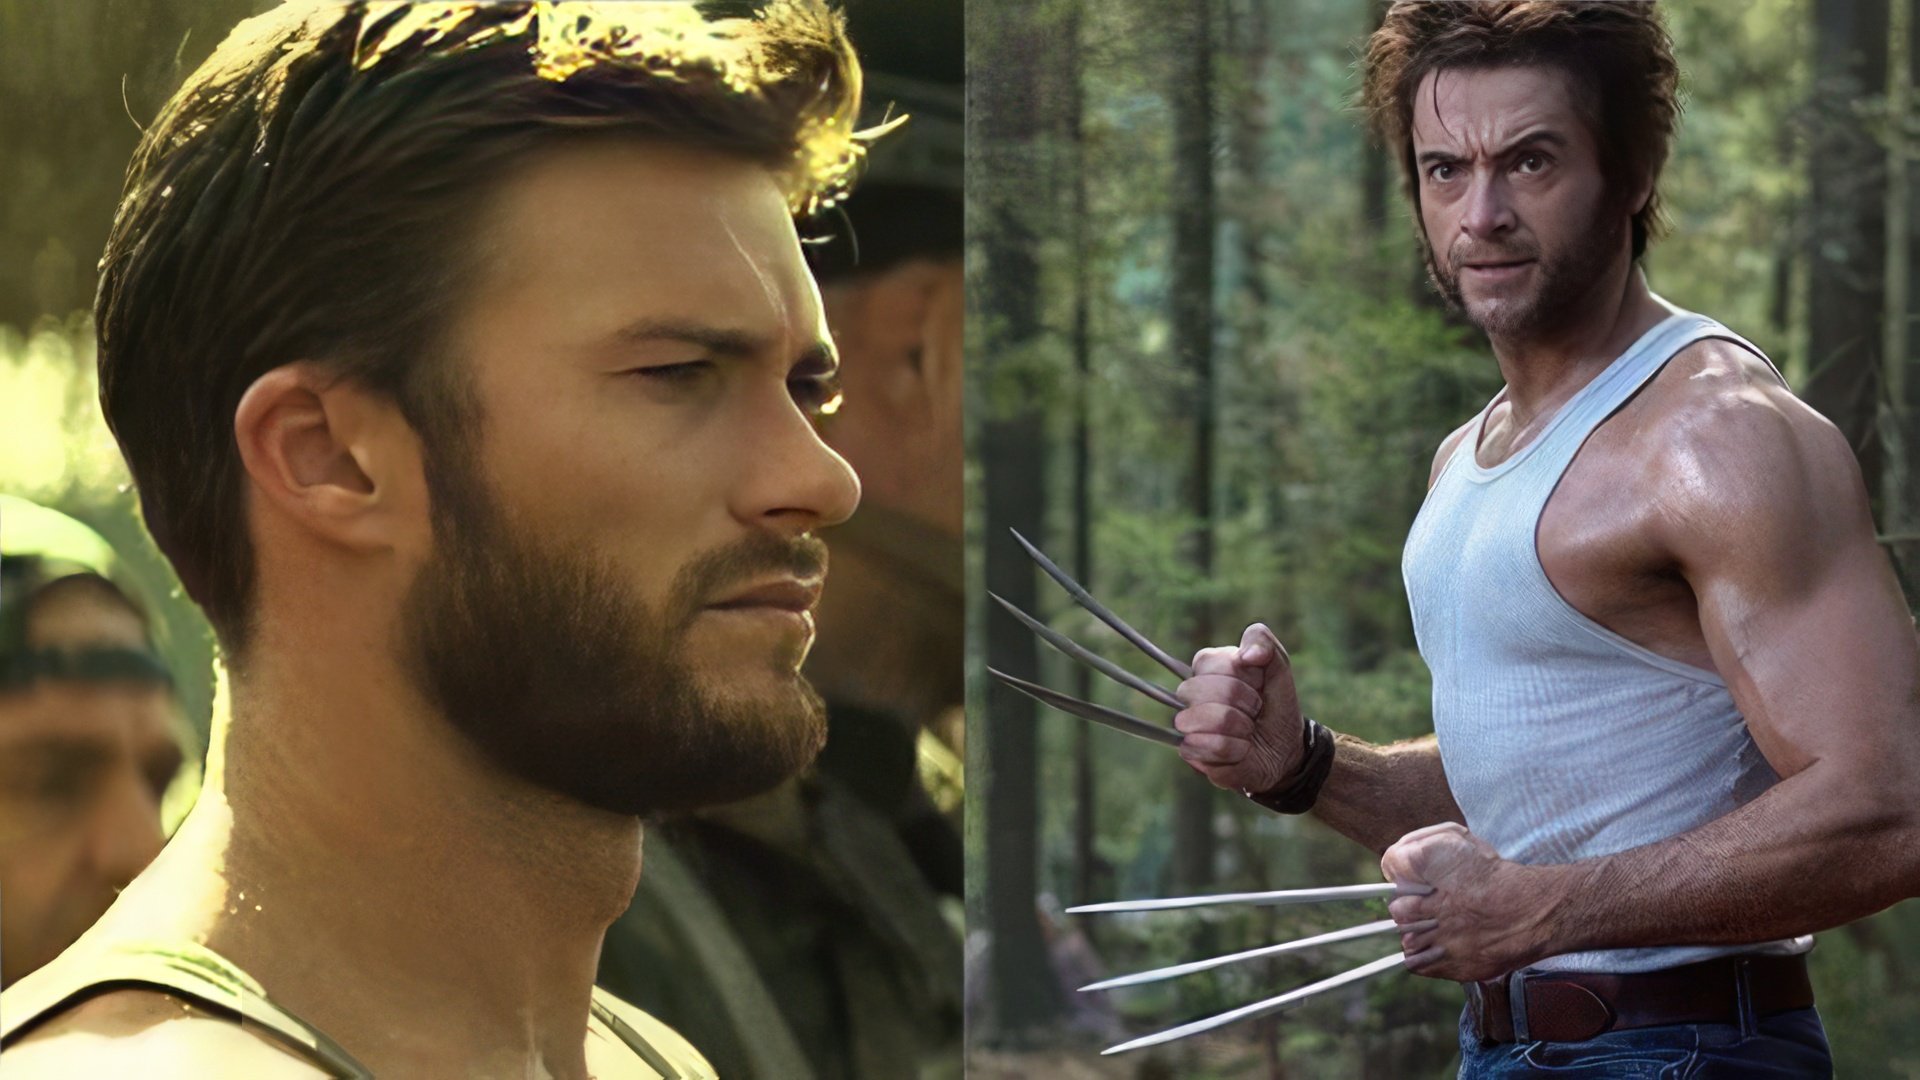 Will Scott Eastwood be the new Wolverine?